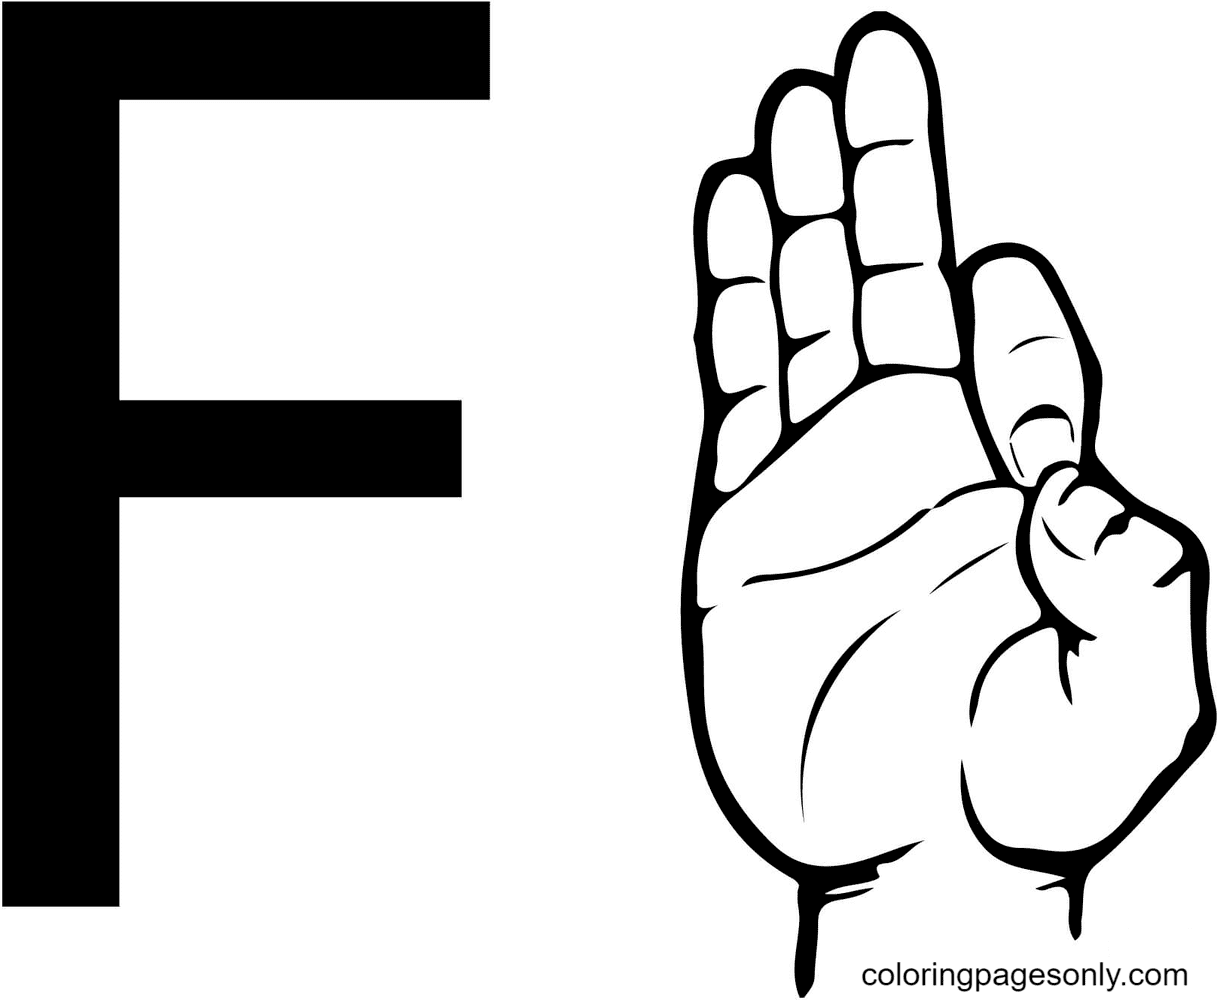 ASL Sign Language Letter F Coloring Pages